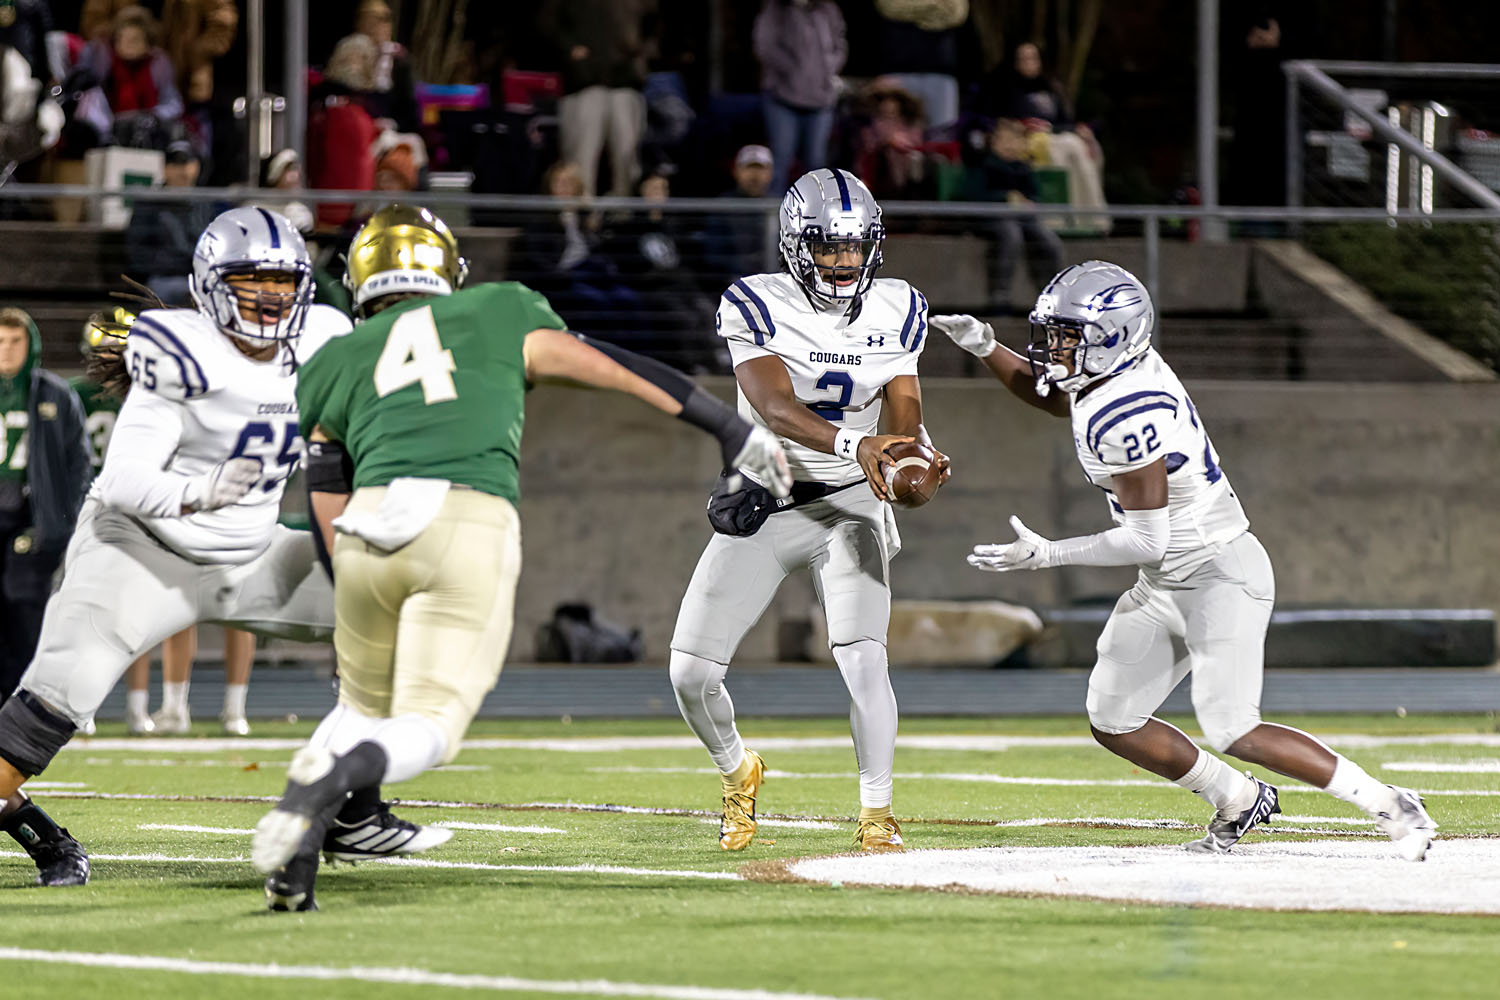 Clay-Chalkville's Osley scores 3 TDs, wins Player of the Week